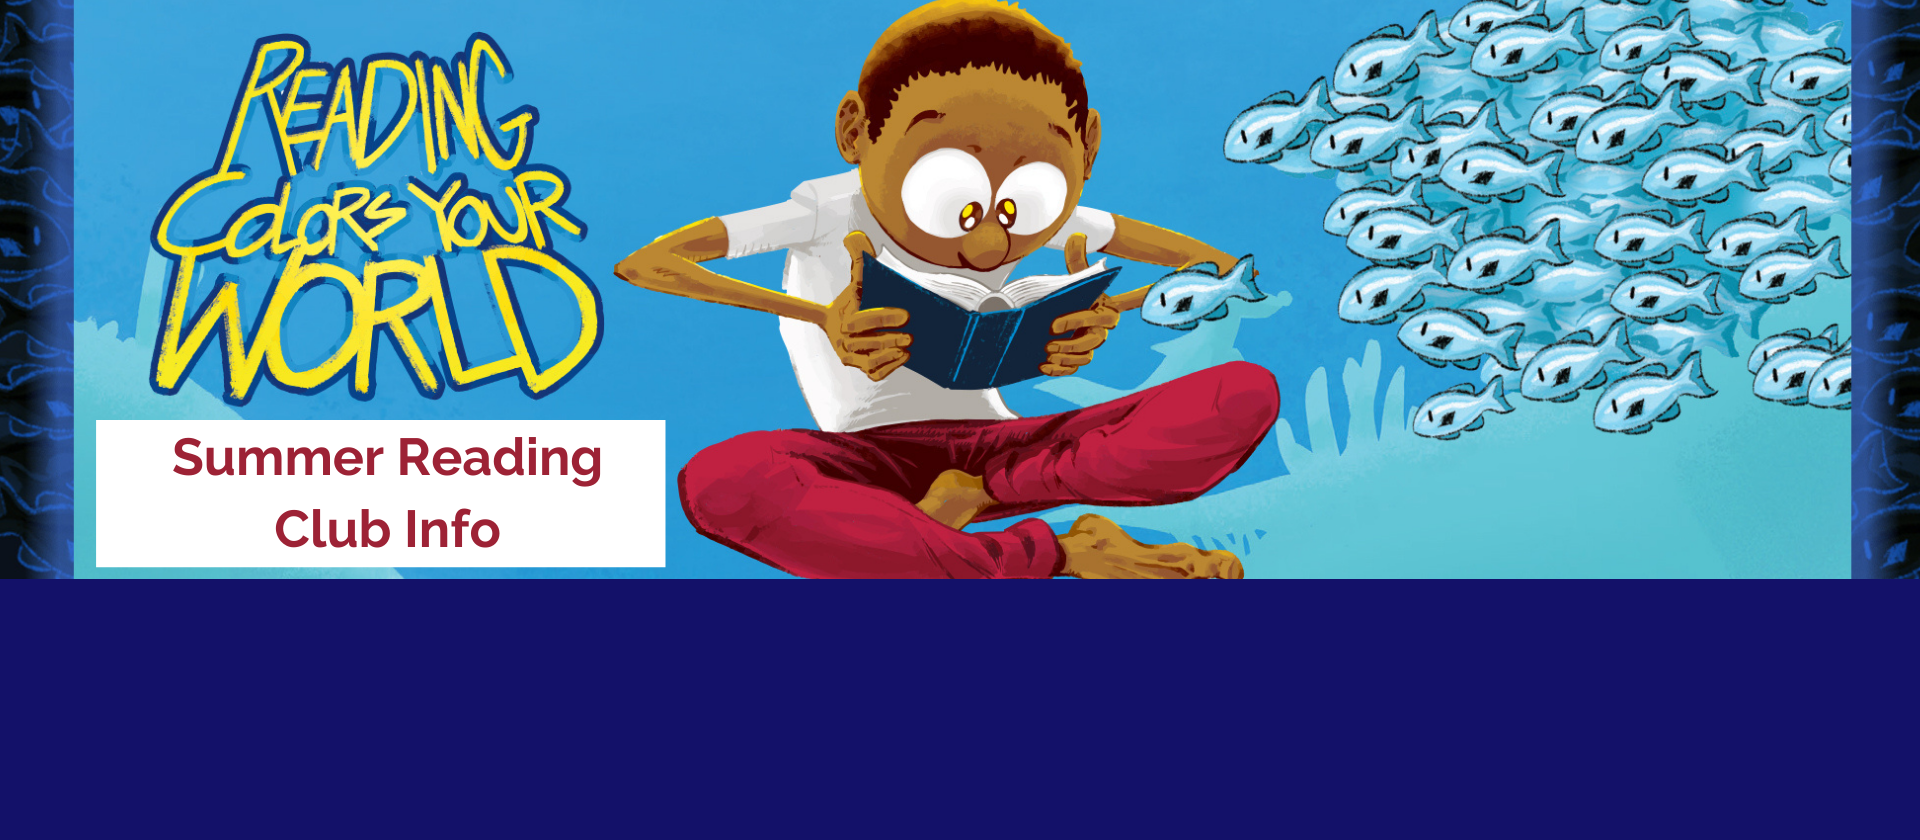 <h1>Summer Reading Club</h1>
<p>Check out the great challenges and prizes your student can learn by joining ad reading with the Summer Reading Club!</p>
<p>&nbsp;<br />
<a href="https://hws.bps101.net/lrc/" class="button ">Read More</a></p>
